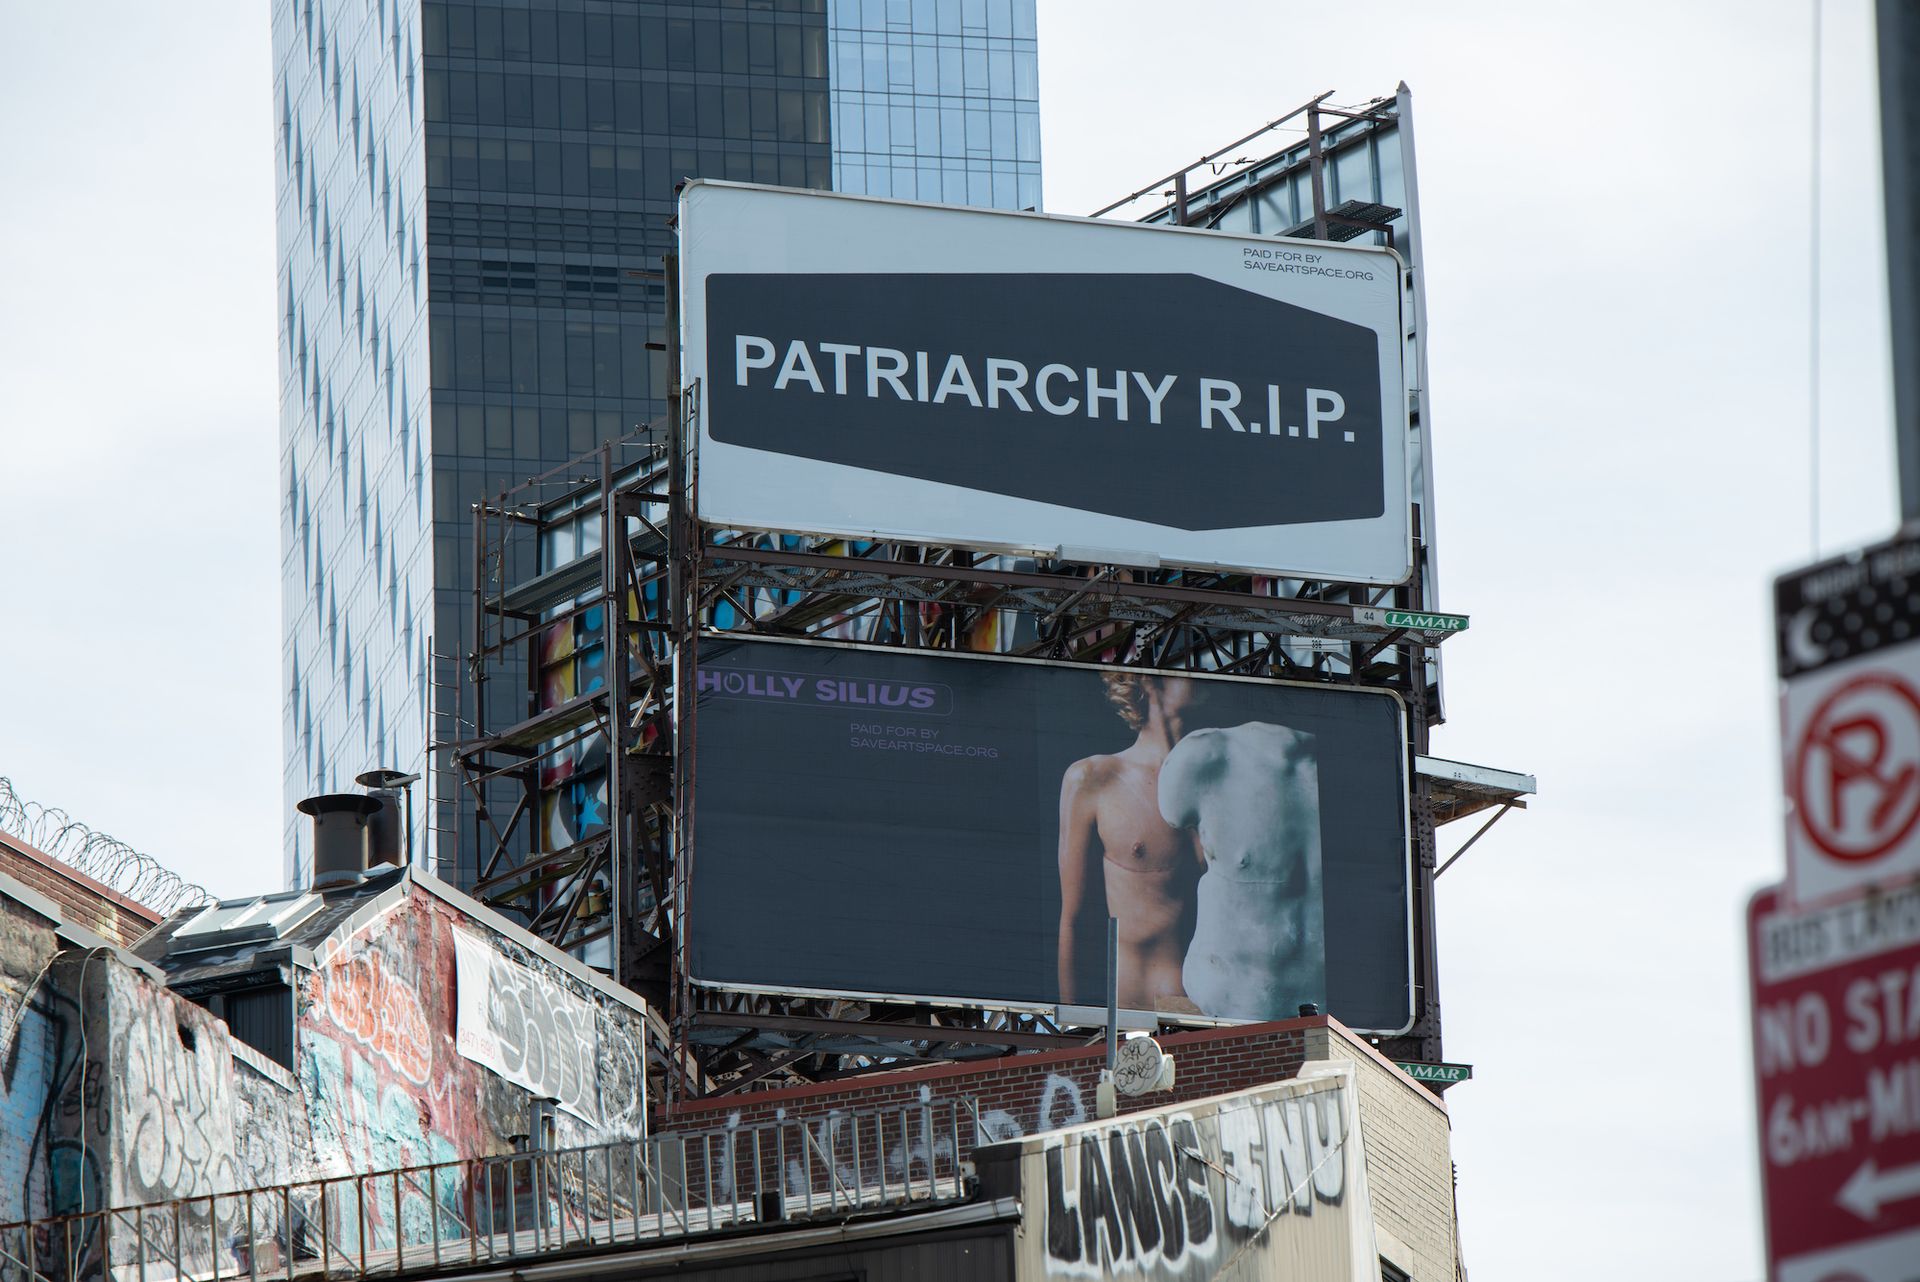 Billboards by Nadya Tolokonnikova (top) and Holly Silius (below) in Lower Manhattan as part of the SaveArtSpace exhibition Patriarchy RIP Photo by Scott Stanger